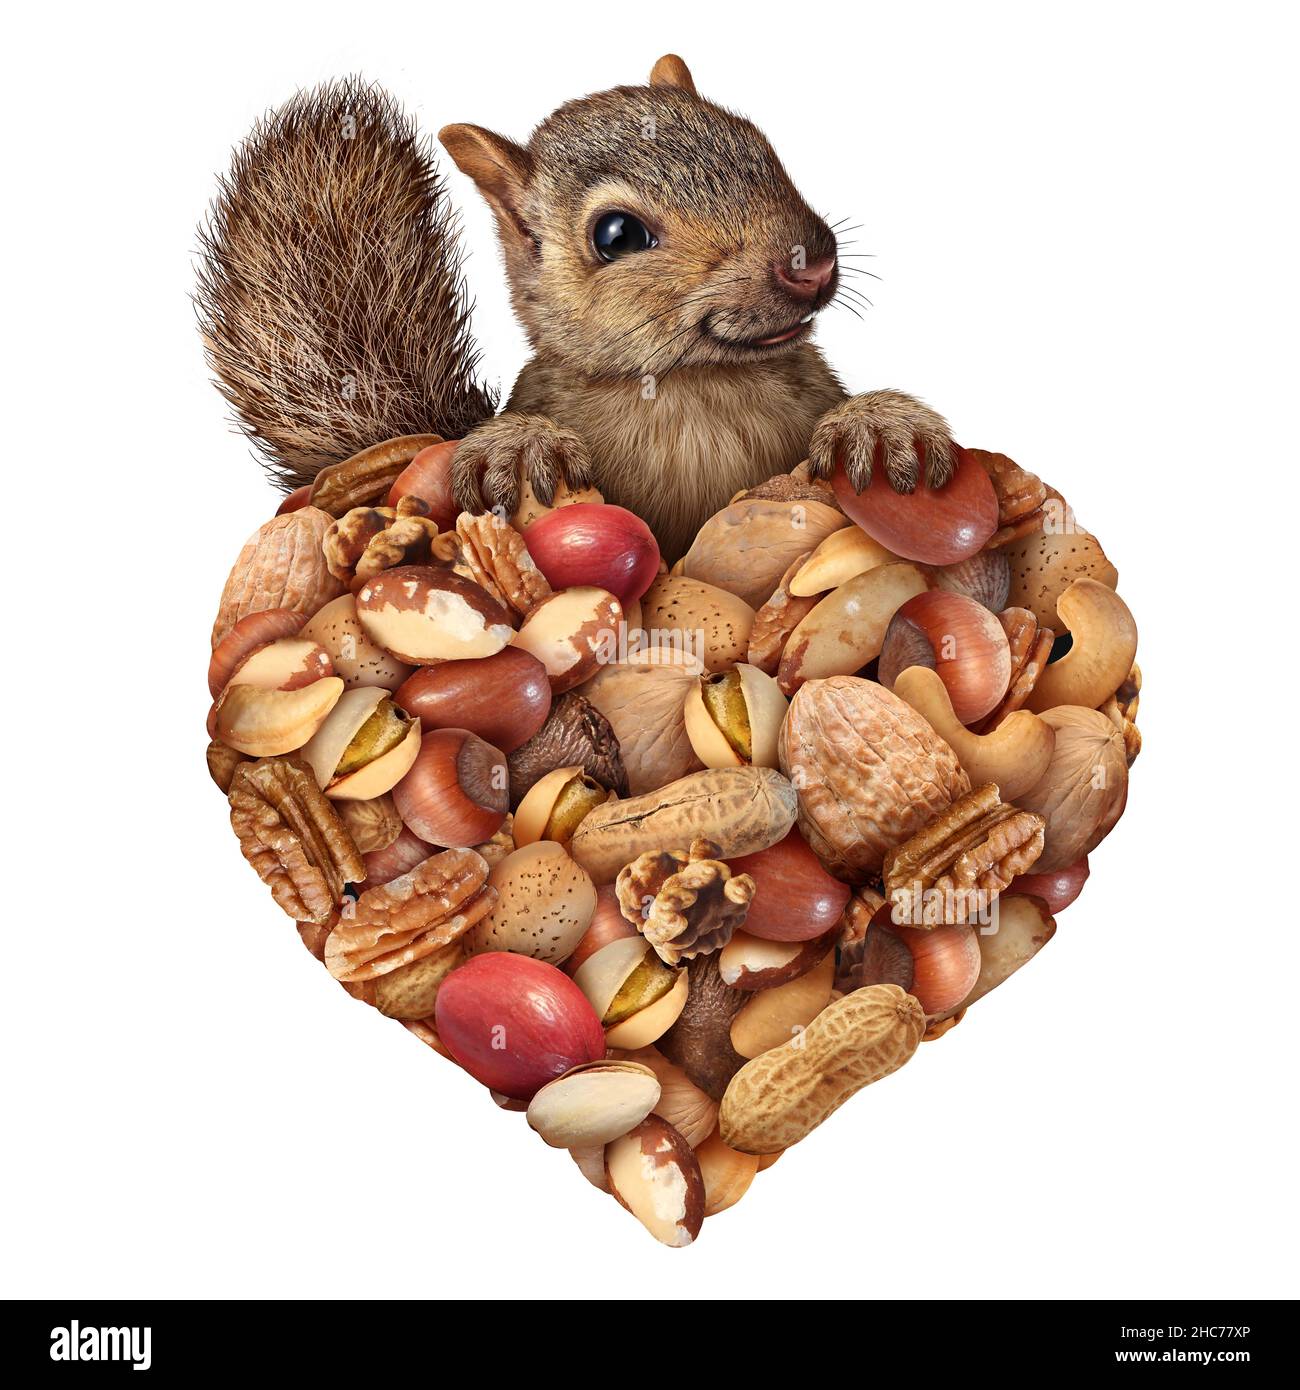 Love of nuts concept as a squirrel holding a group of peanuts and assorted nuts shaped as a heart symbol with a cute wild rodent representing. Stock Photo